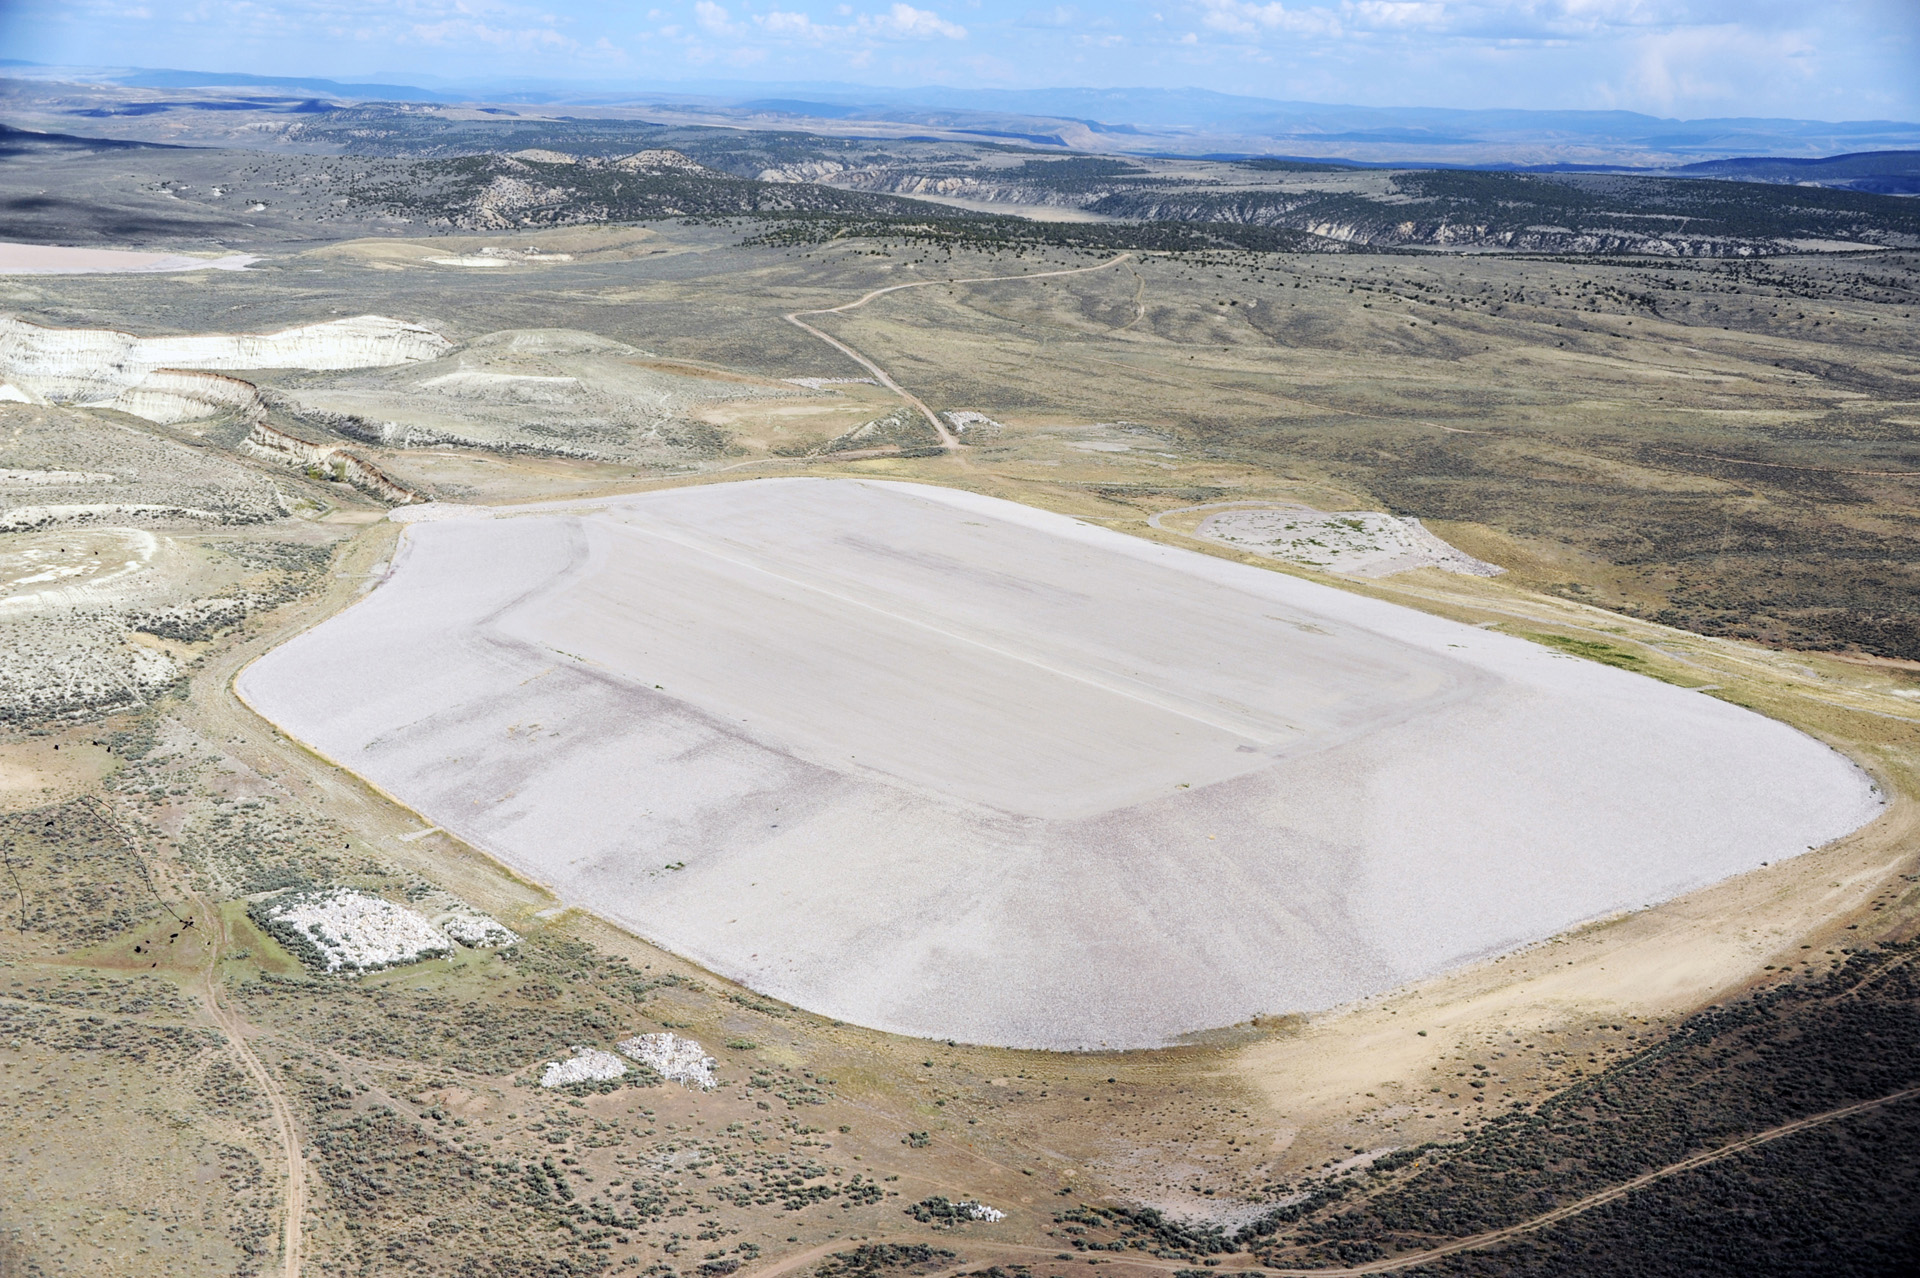 Aerial image of one of the two Maybell disposal sites showing an irregular, gravel-covered polygon in an arid, mountainous landscape